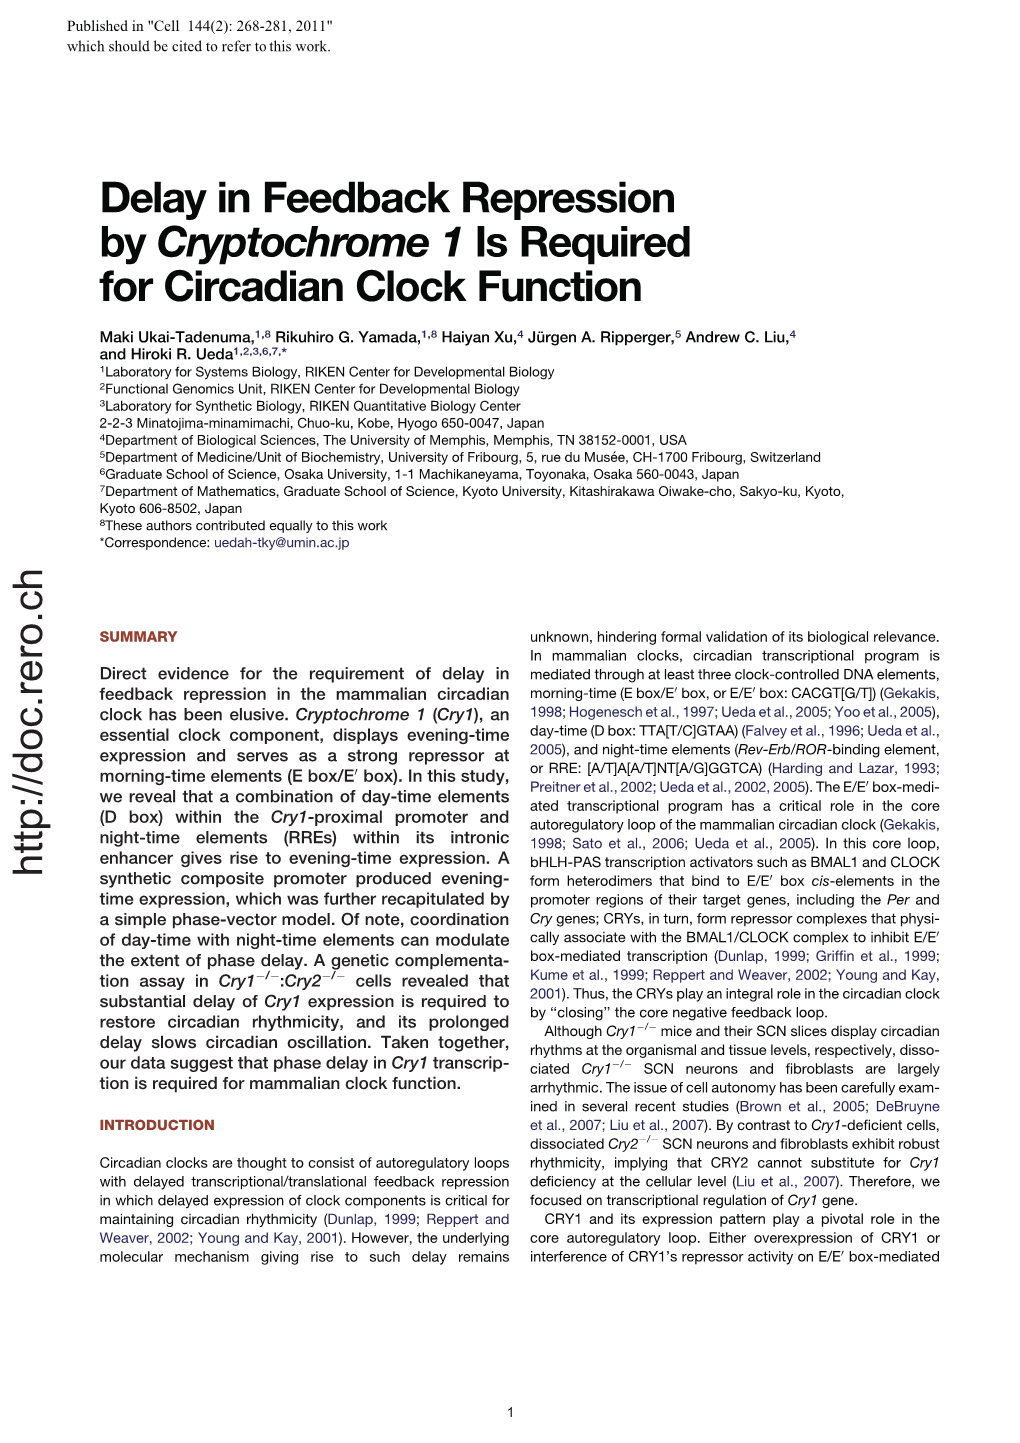 Delay in Feedback Repression by Cryptochrome 1 Is Required for Circadian Clock Function